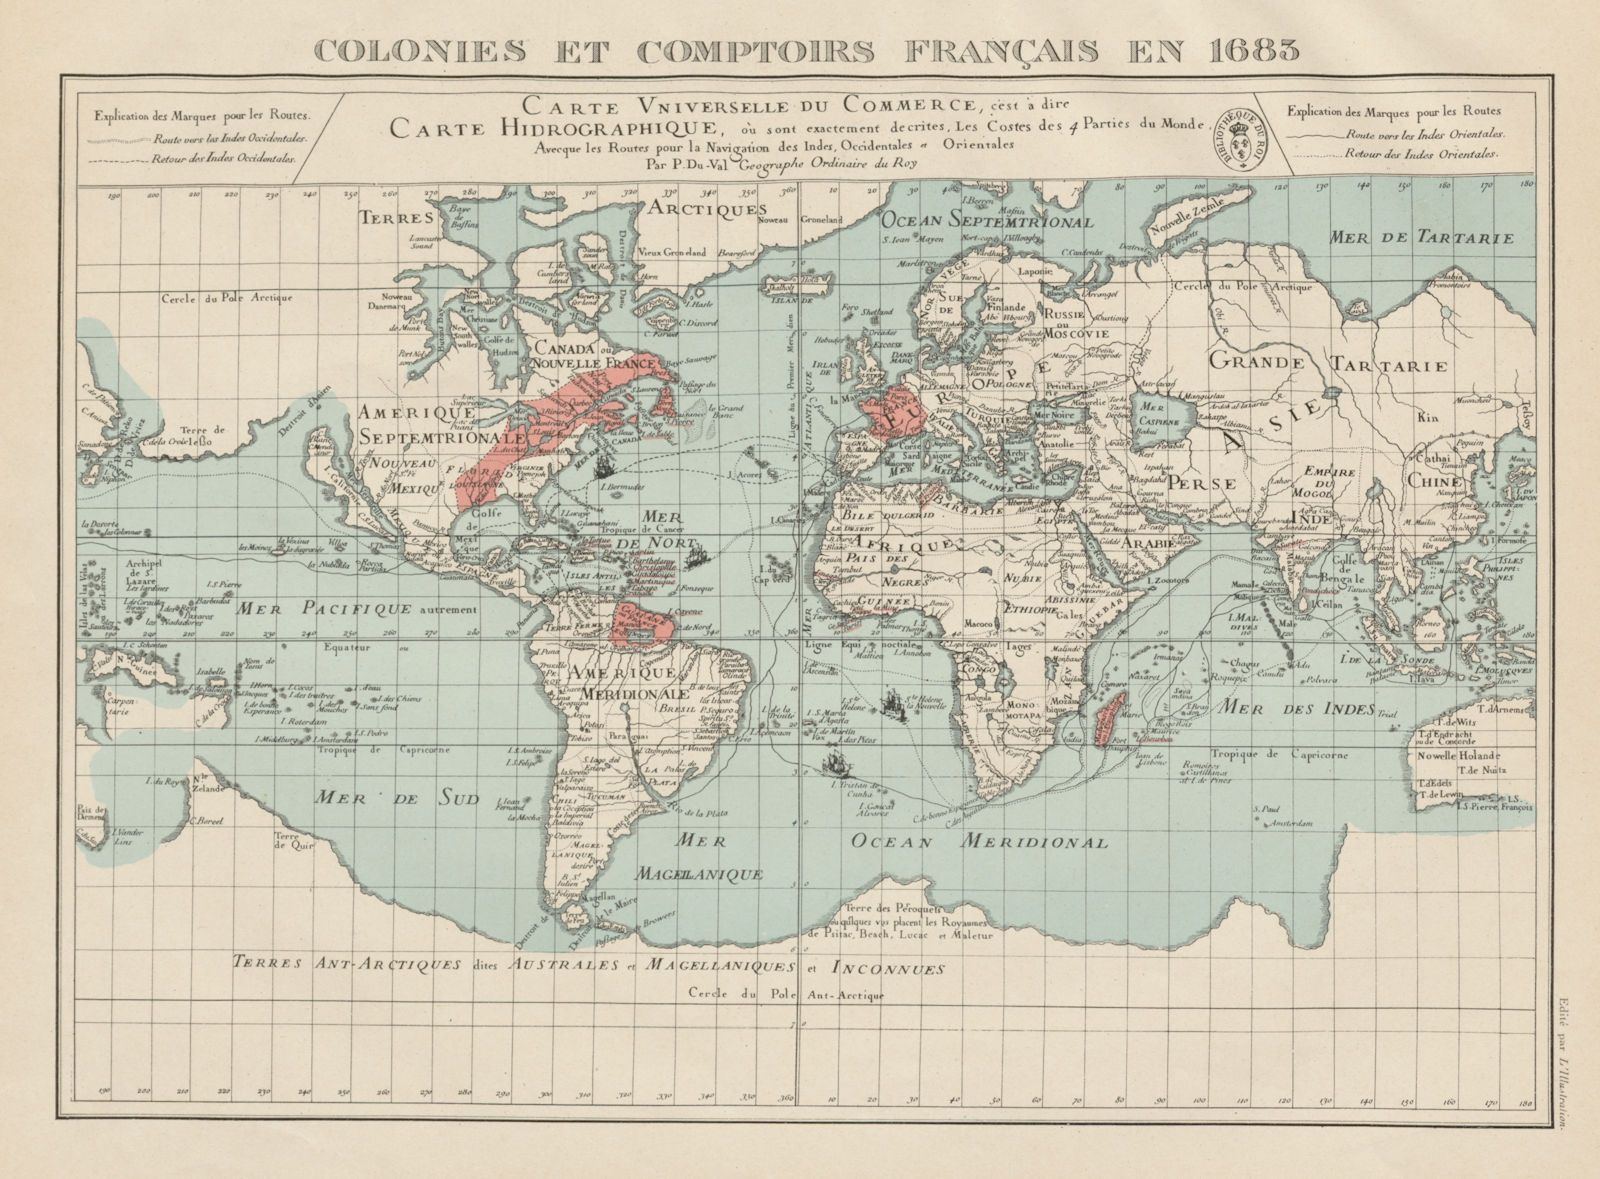 FRENCH COLONIES & TRADING POSTS 1683. Colonies et comptoirs Français 1929 map